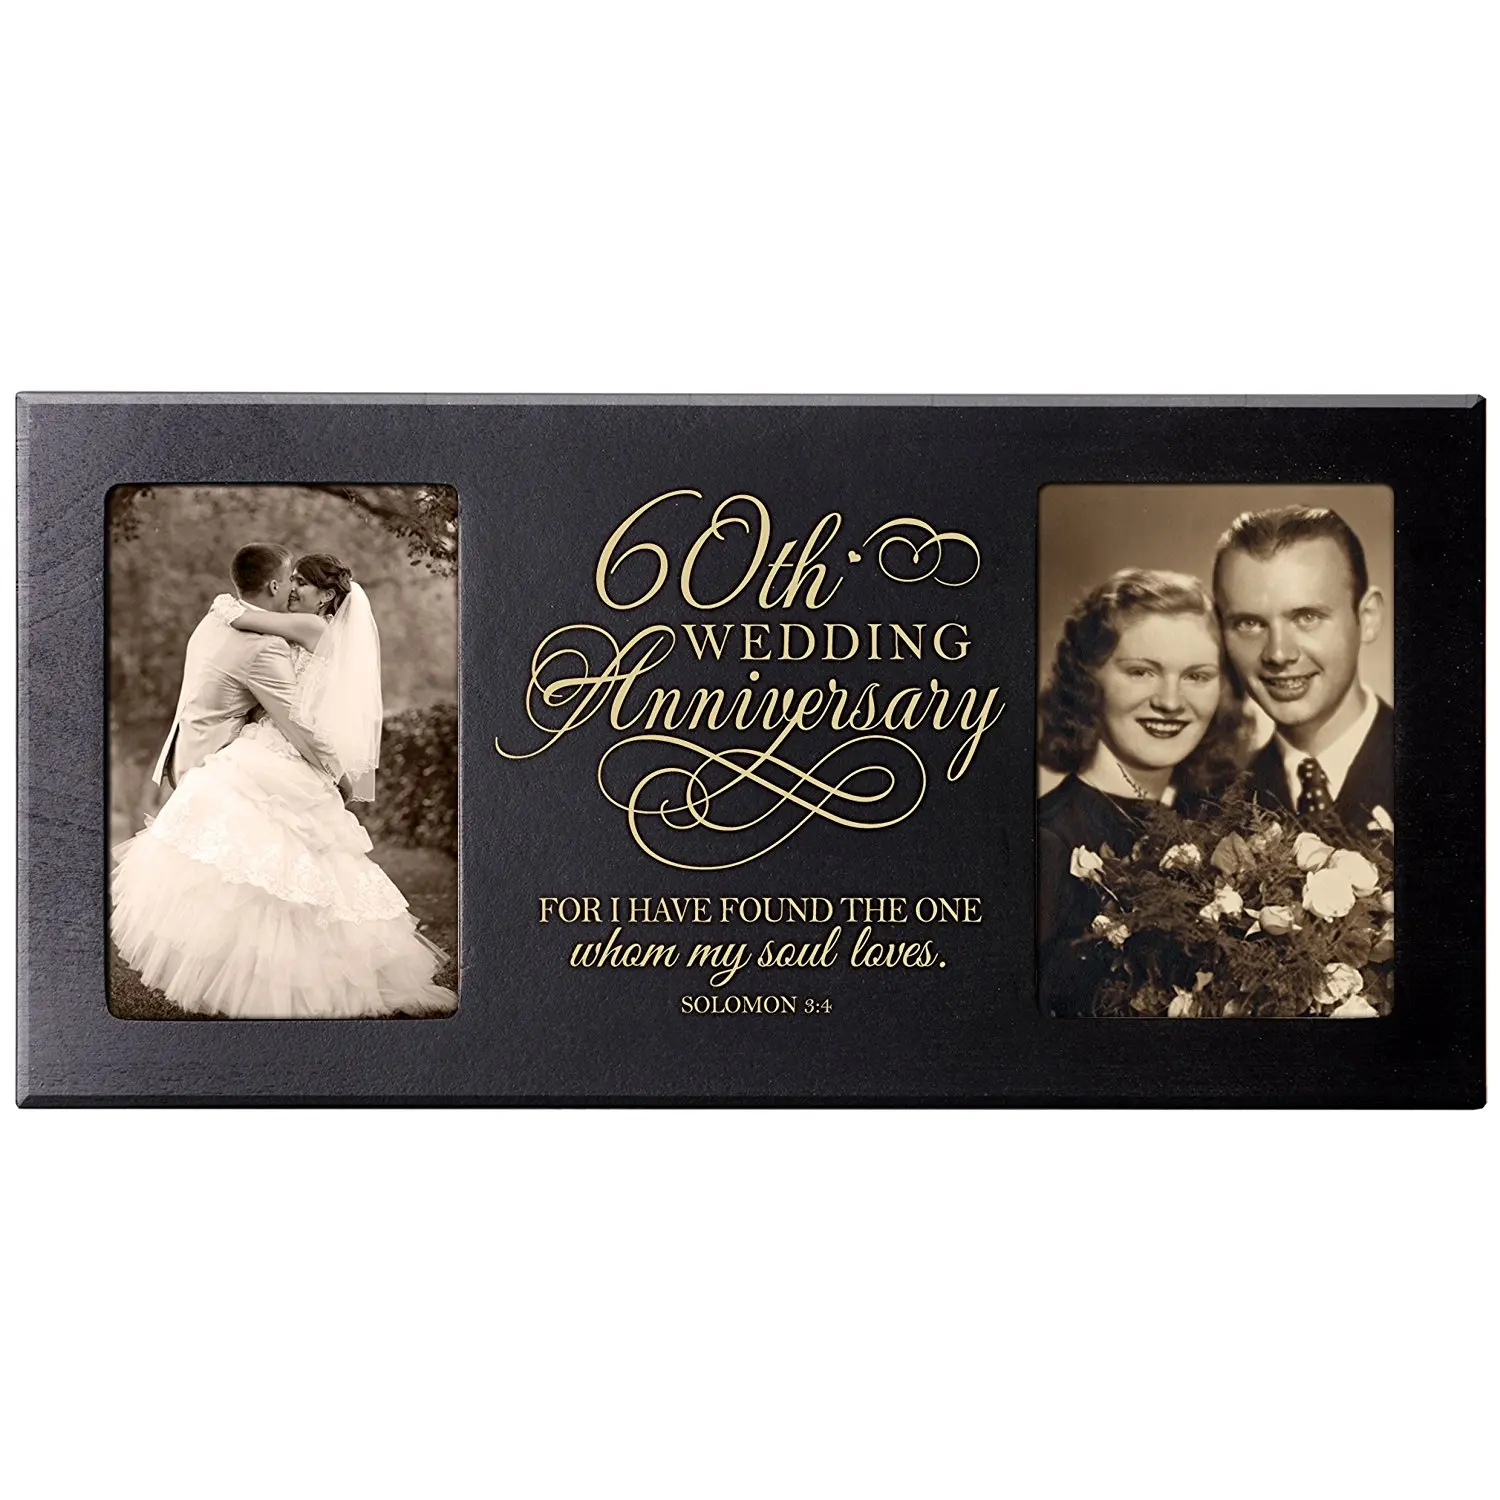 Buy Personalized 60th Anniversary Gifts Picture Frame Custom 60 Year Wedding Anniversary Gift Housewarming Ideas For Parents Couple Him And Her I Have Found The One Whom My Soul Loves Solomon 3 4,Pork Loin Roast Recipe